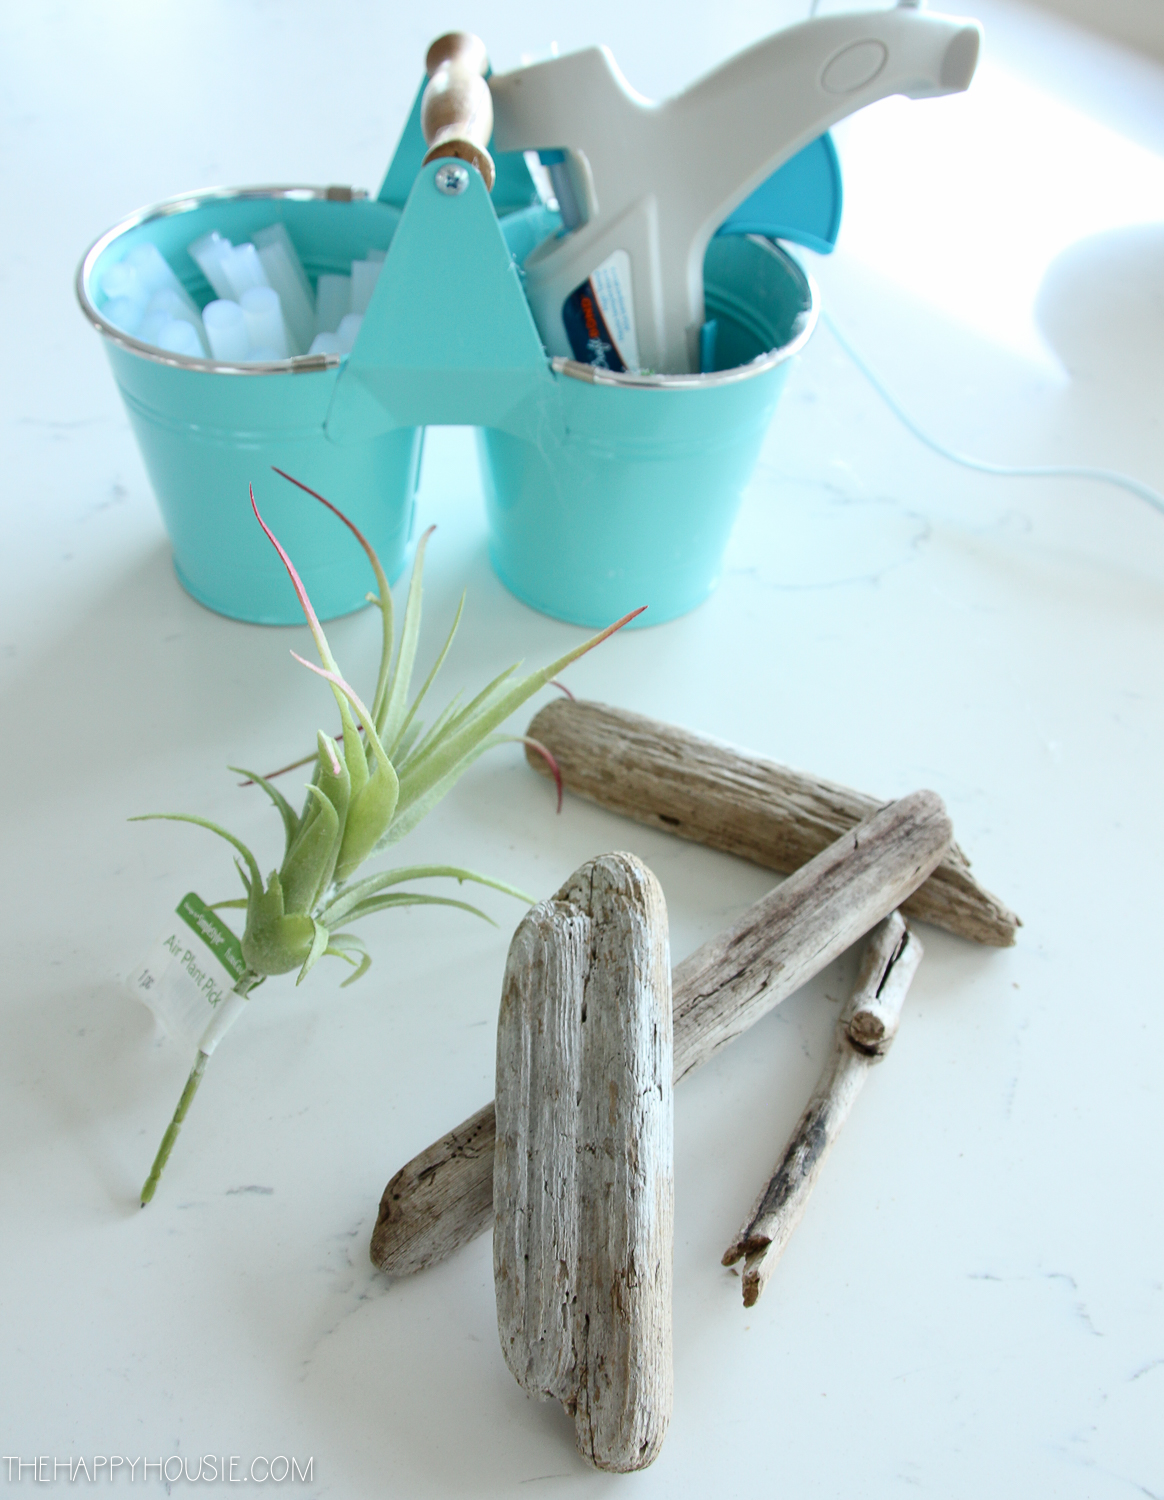 The driftwood, a small plastic plant and a glue gun.